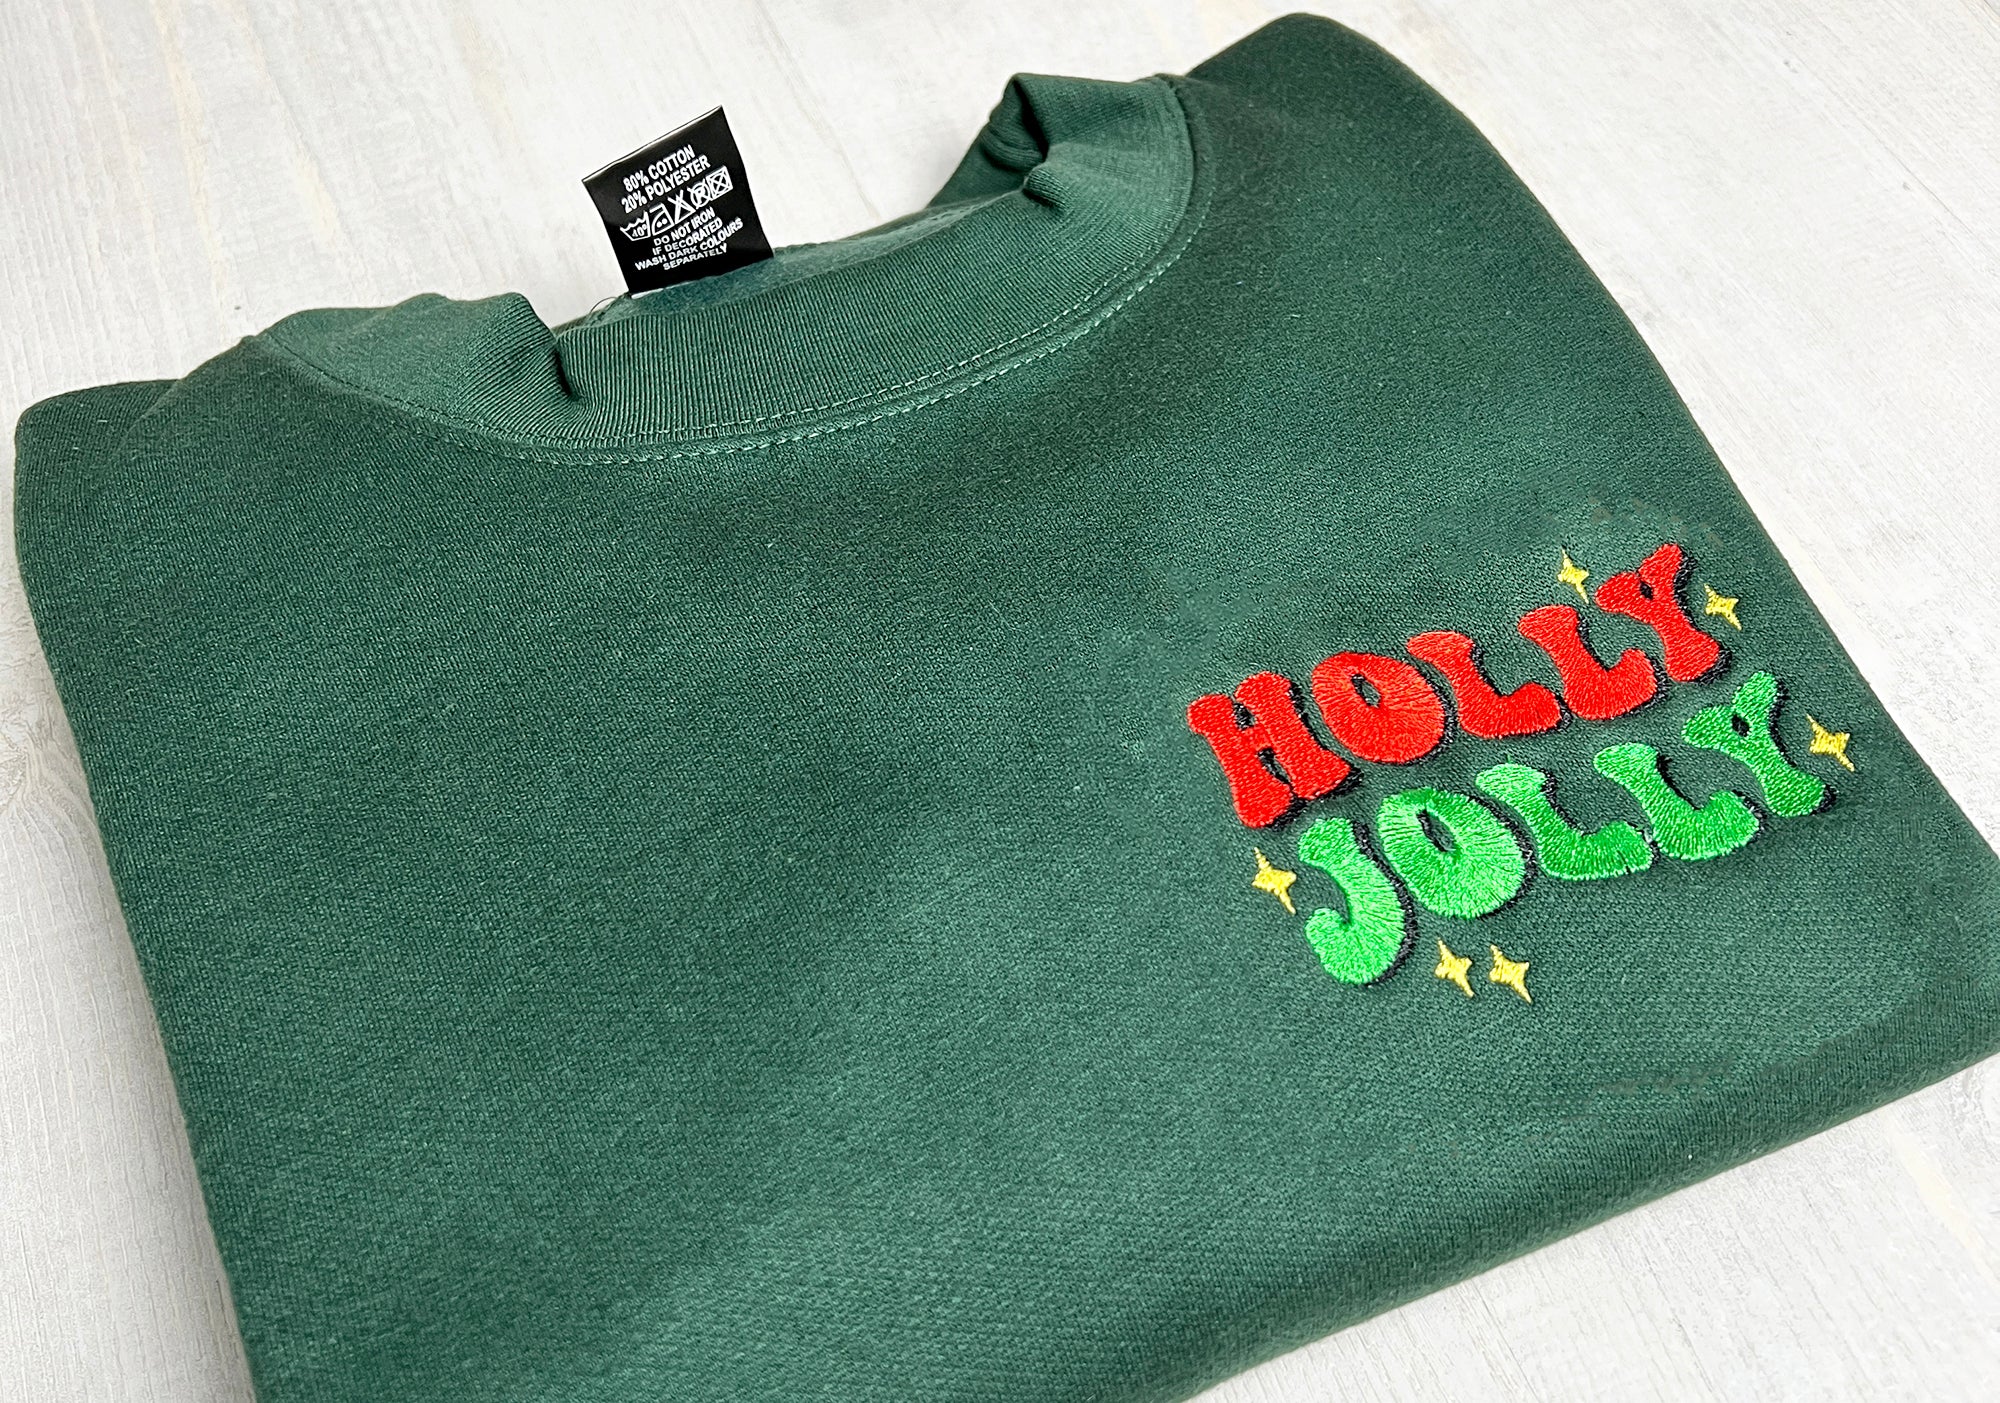 Holly Jolly Christmas Matching Sweatshirt, Christmas Outfit Ideas - obprintshop